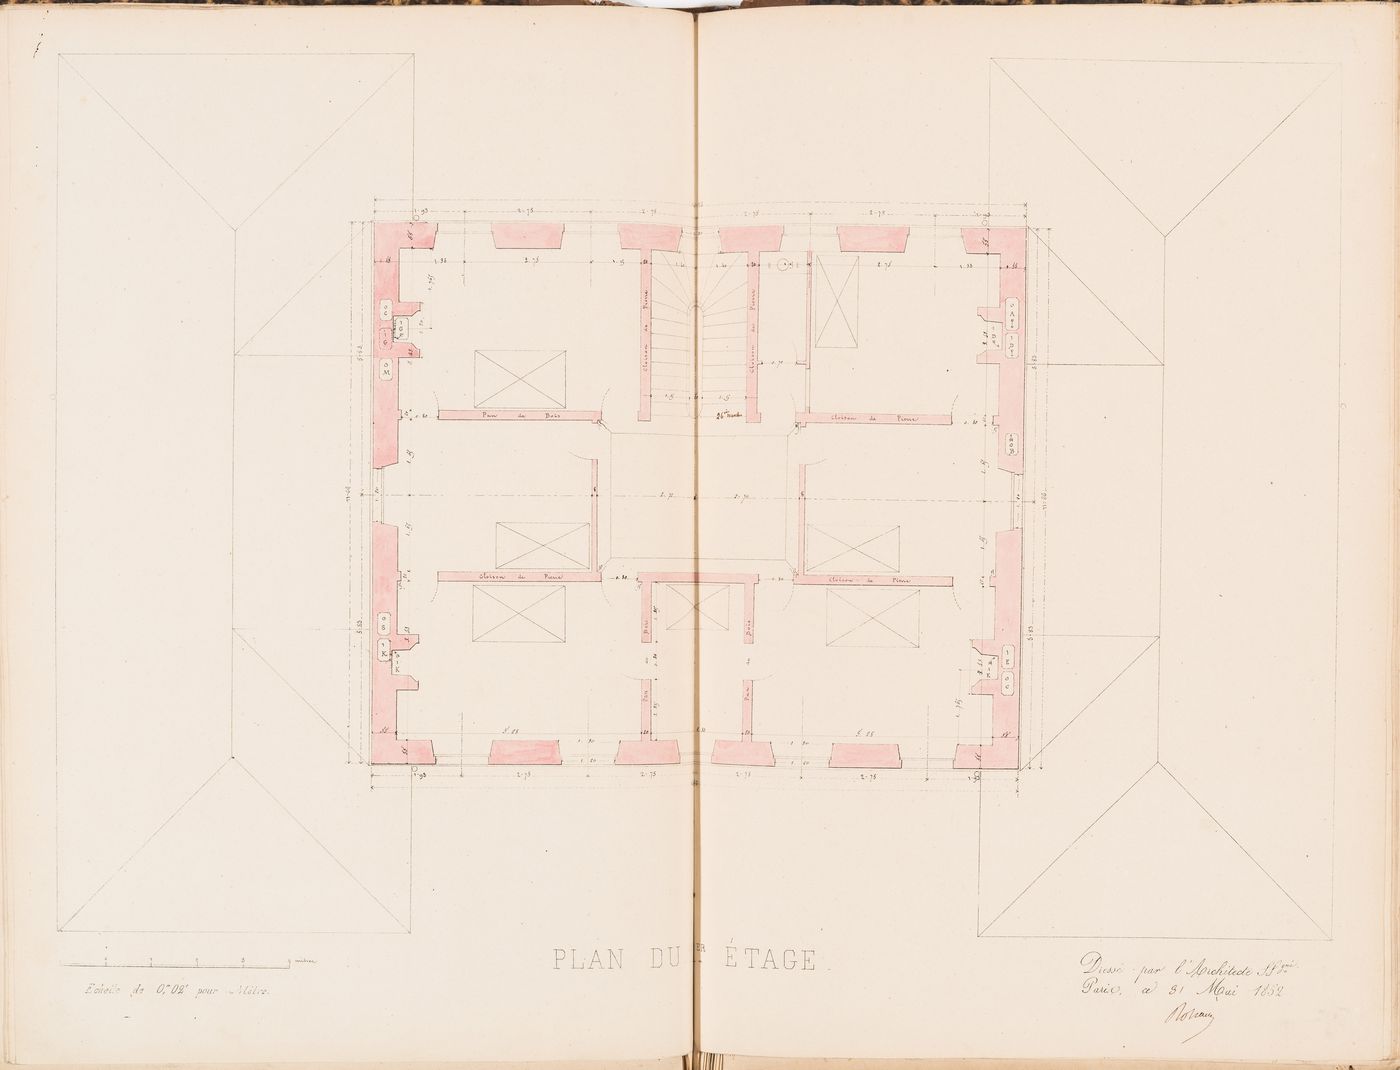 First floor plan for a country house for Madame de Lescure, Royan